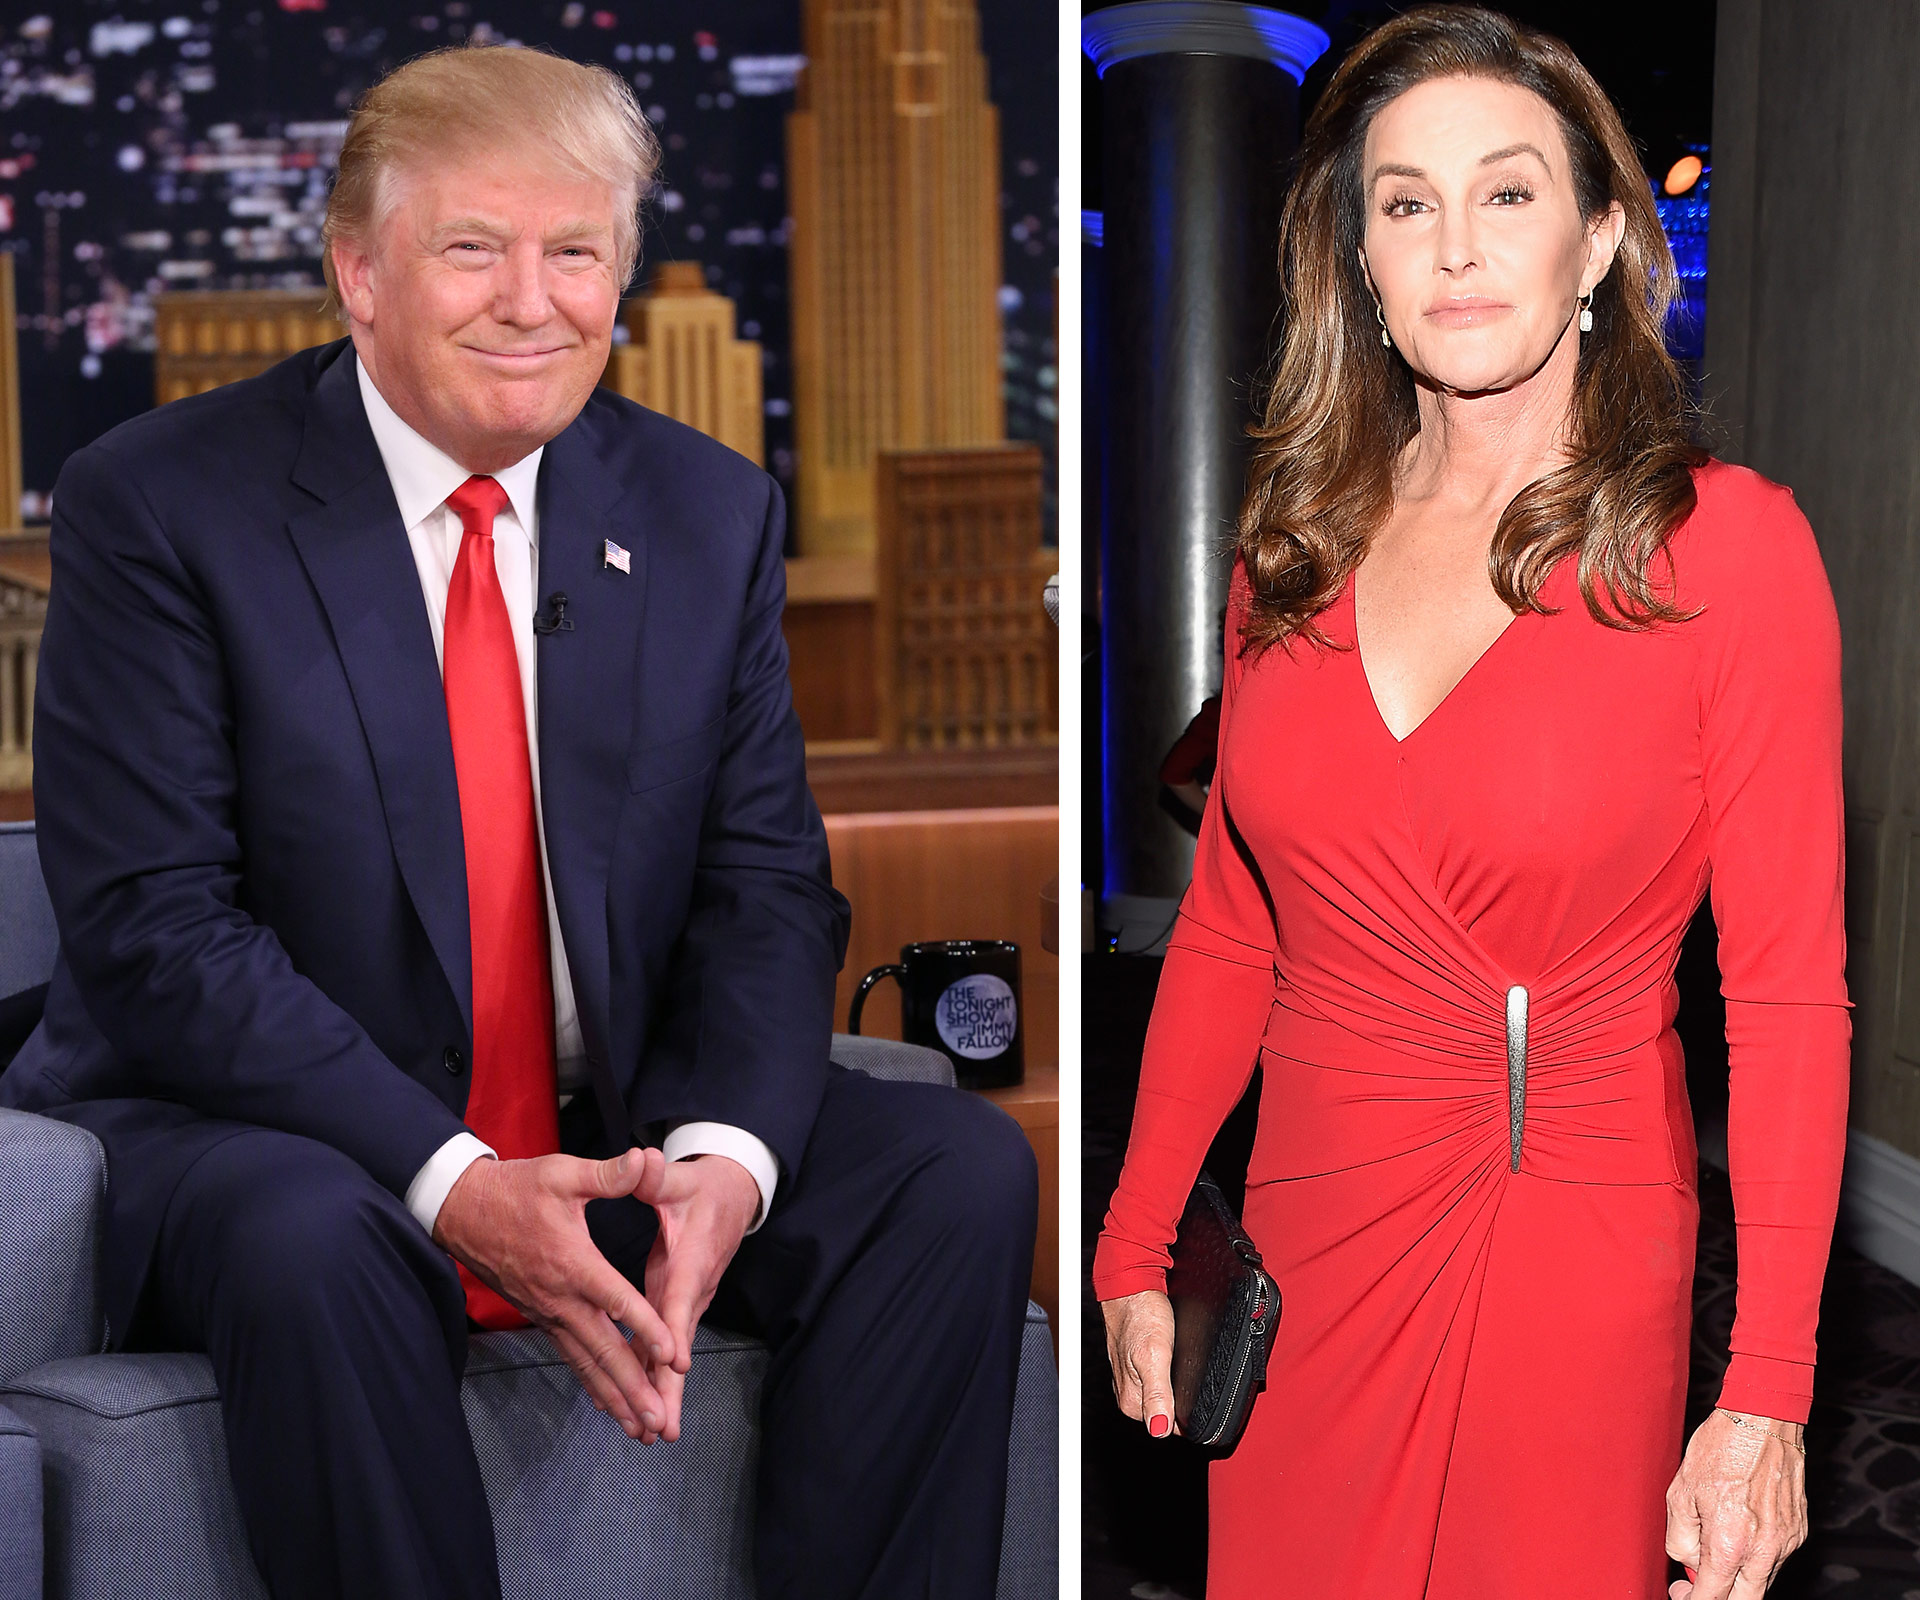 Caitlyn Jenner and Donald Trump